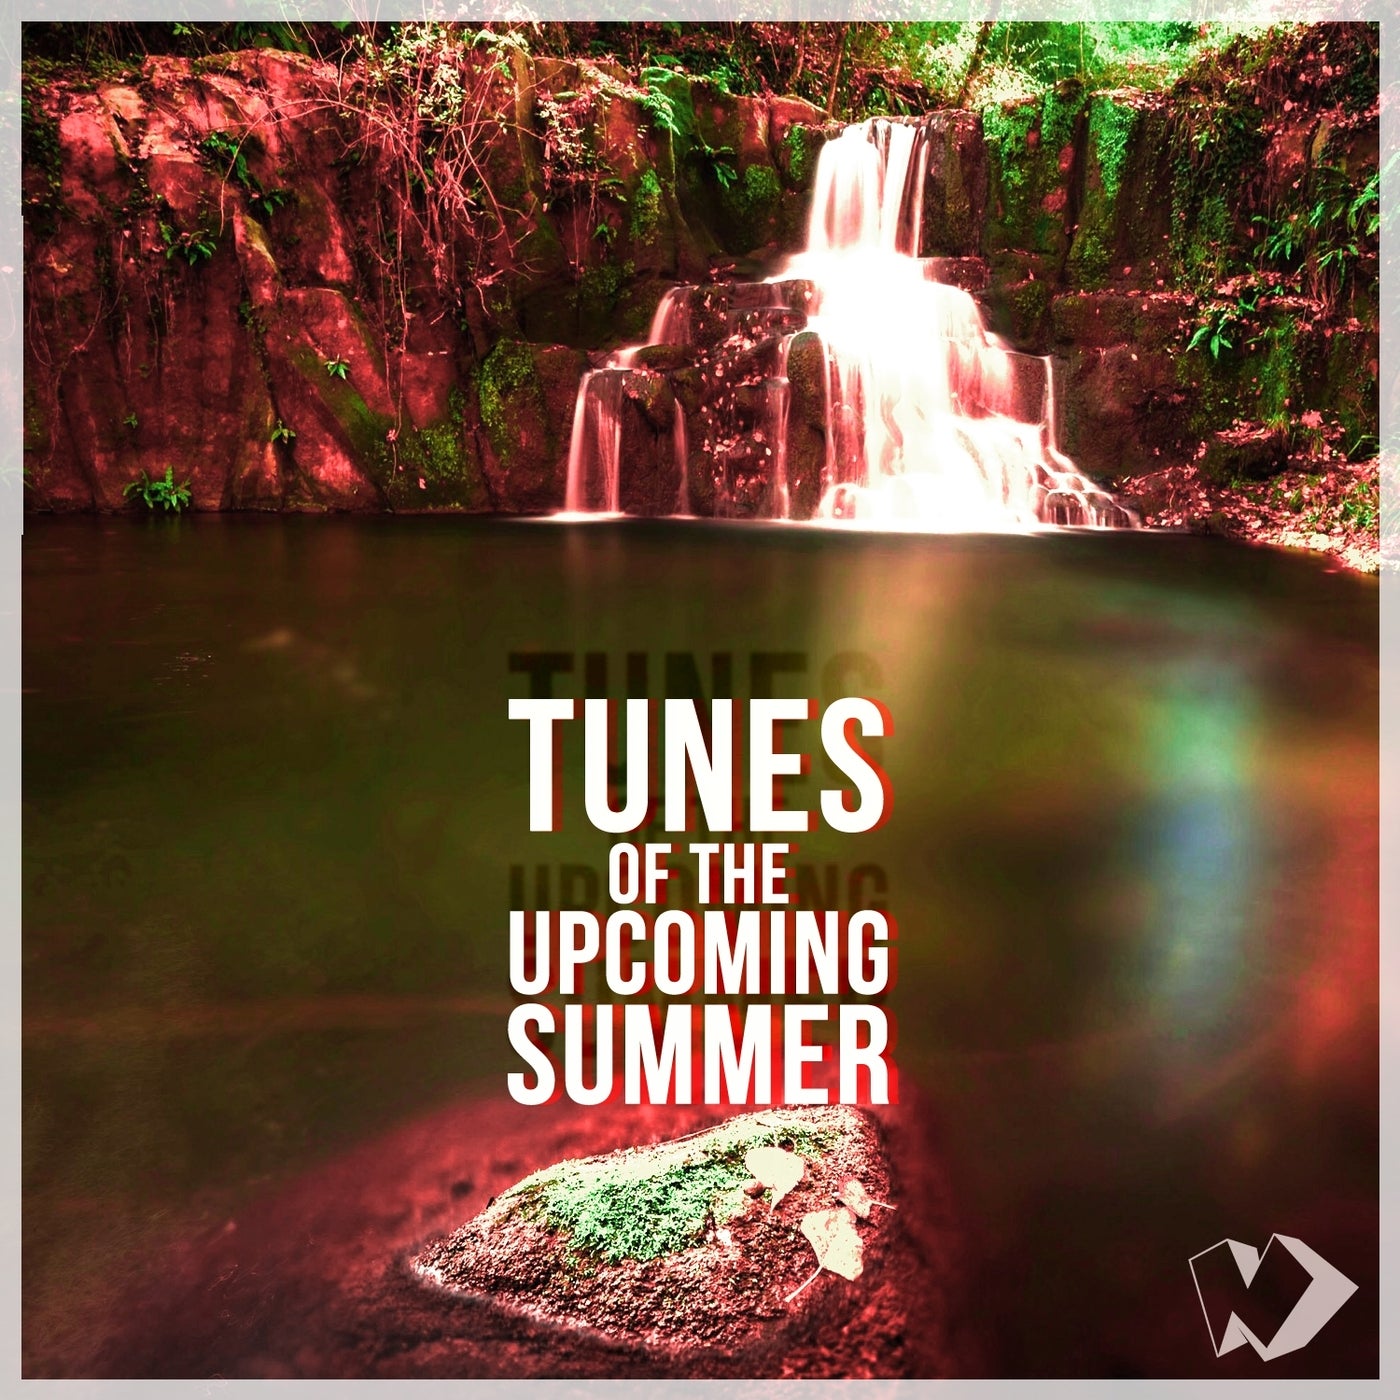 Tunes of the Upcoming Summer